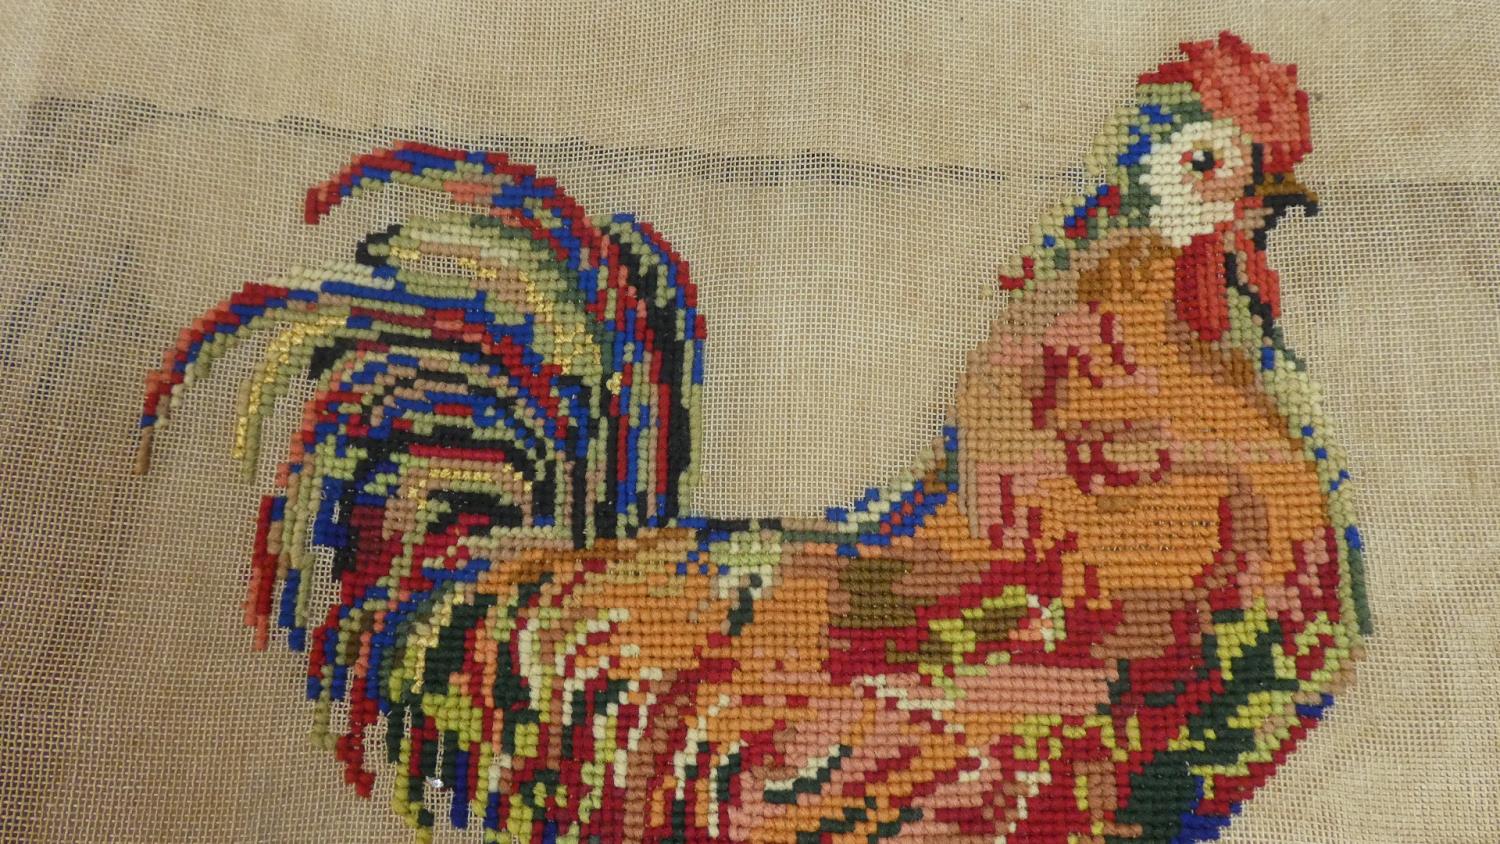 A Maple Framed Tapestry Depicting Cockerel Standing by Chicks Drinking, 43cm Wide - Image 2 of 2